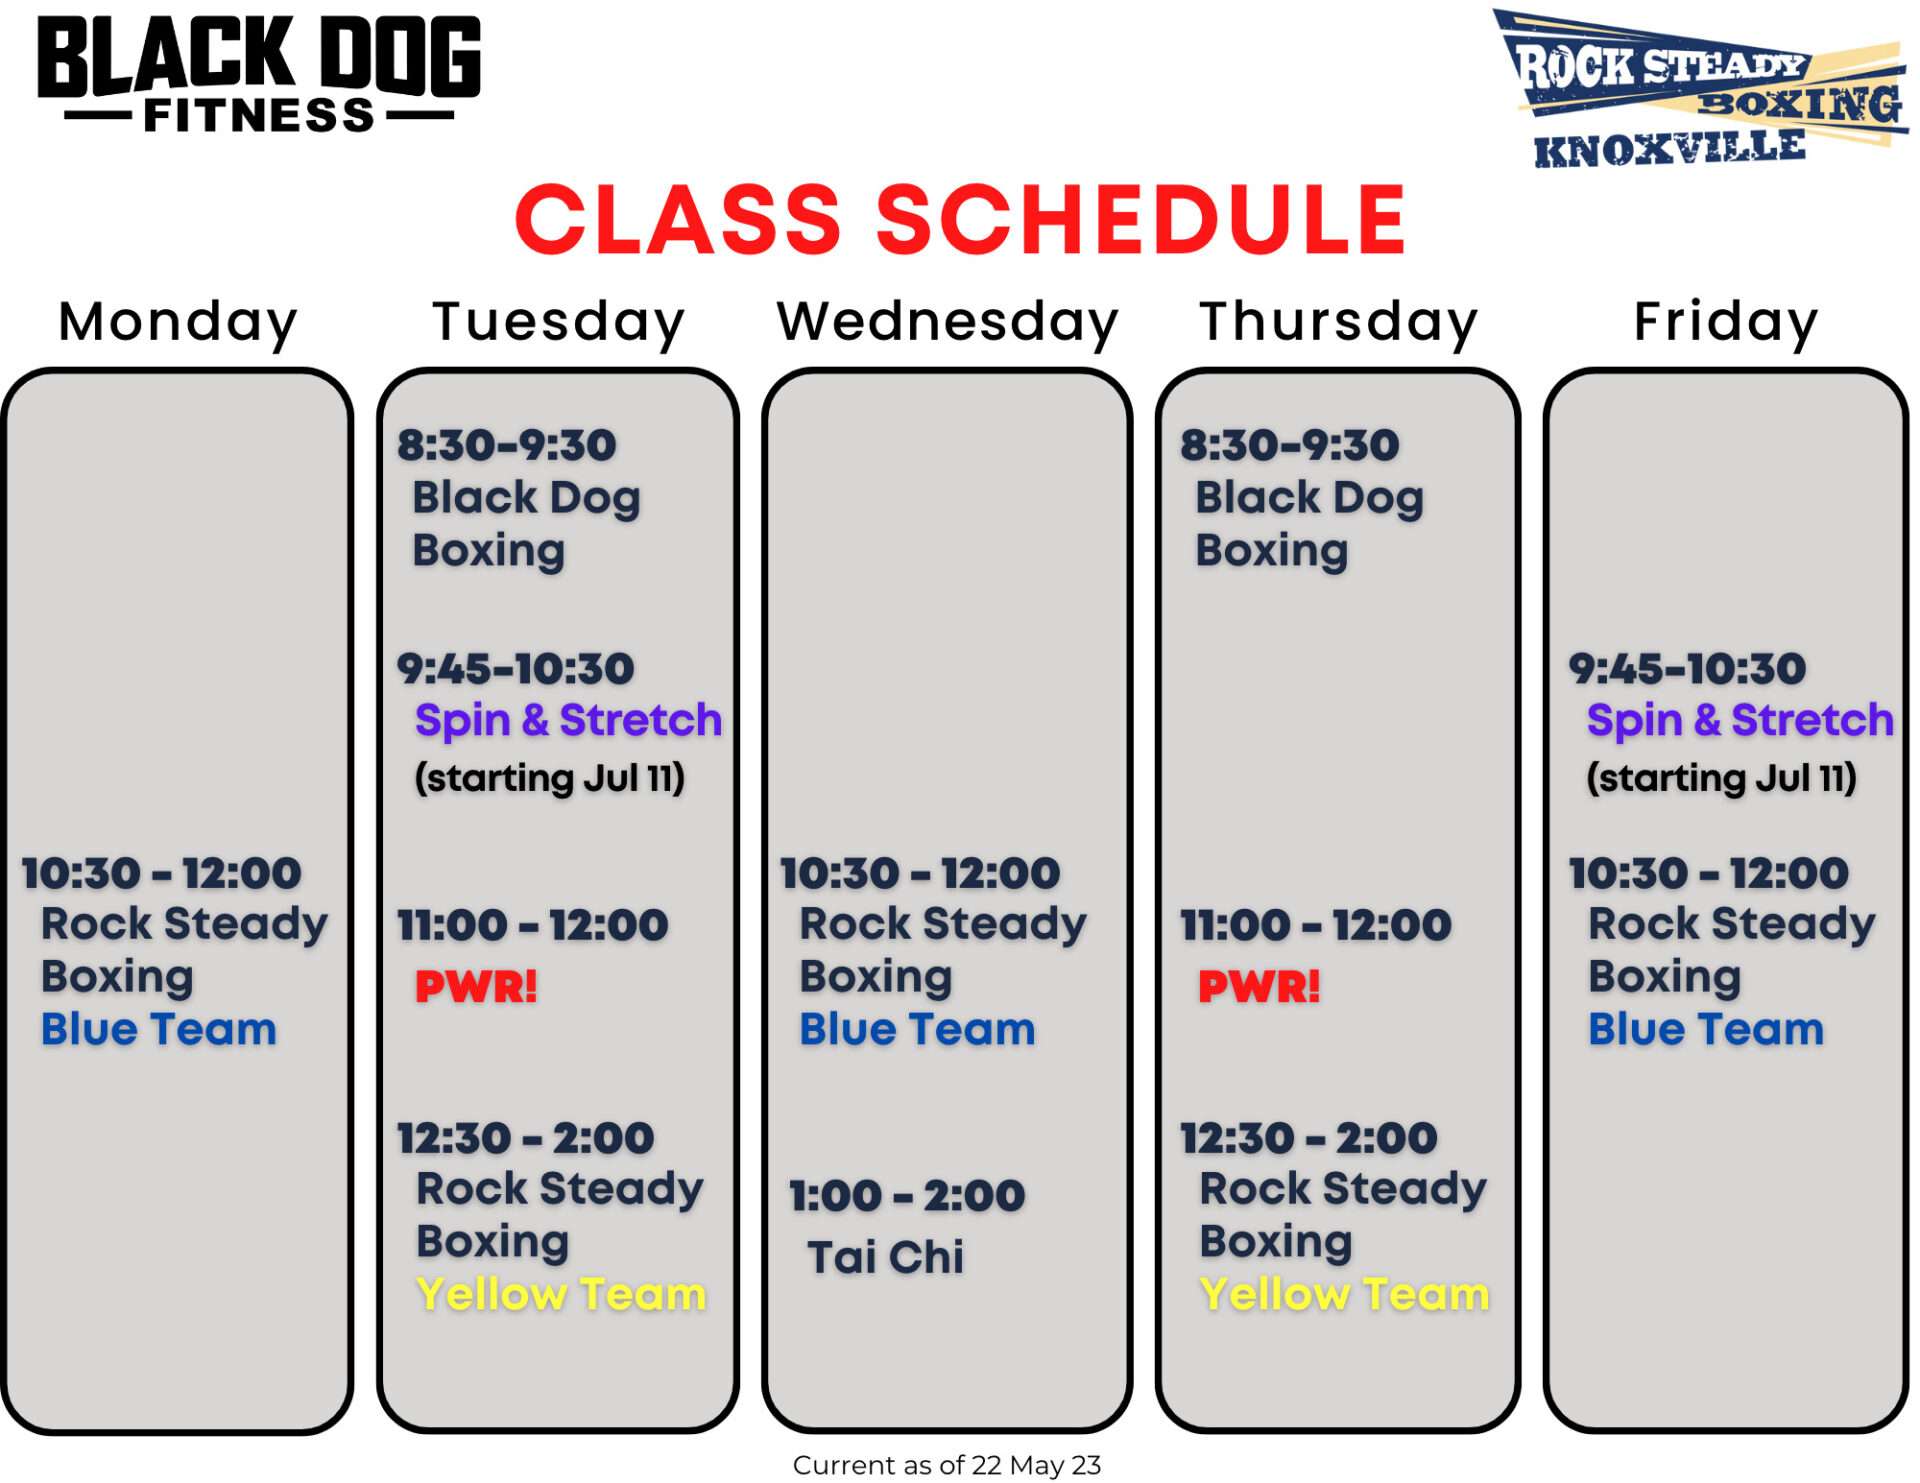 Weekly Schedule of Black Dog Fitness group fitness classes